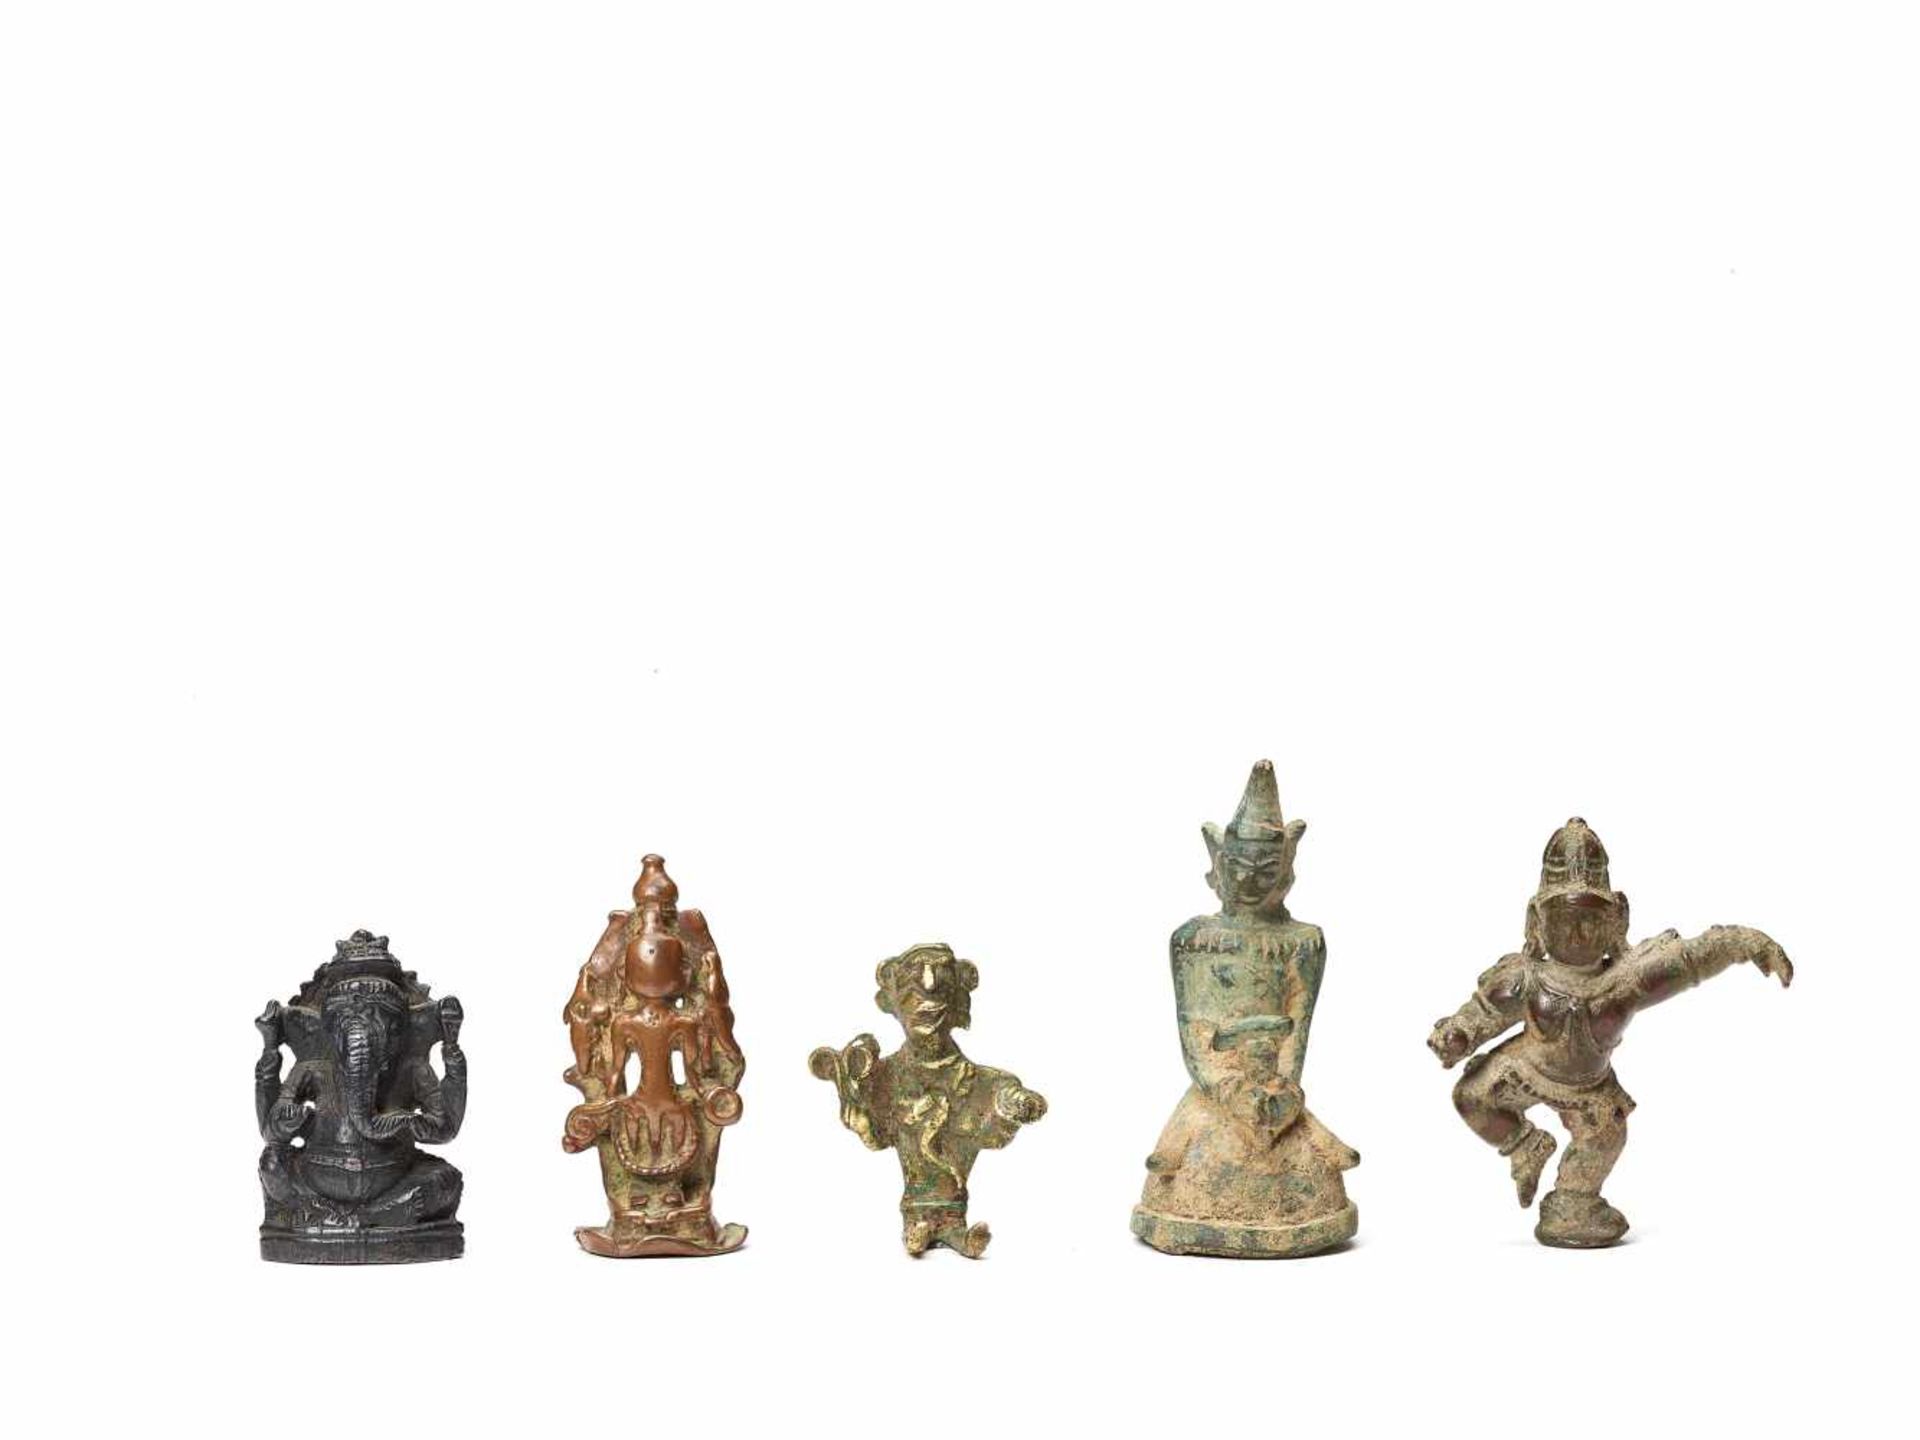 FIVE SMALL BRONZE FIGURES OF DEITIESBronzeIndia and Southeast Asia, 17th to 19th century, possibly